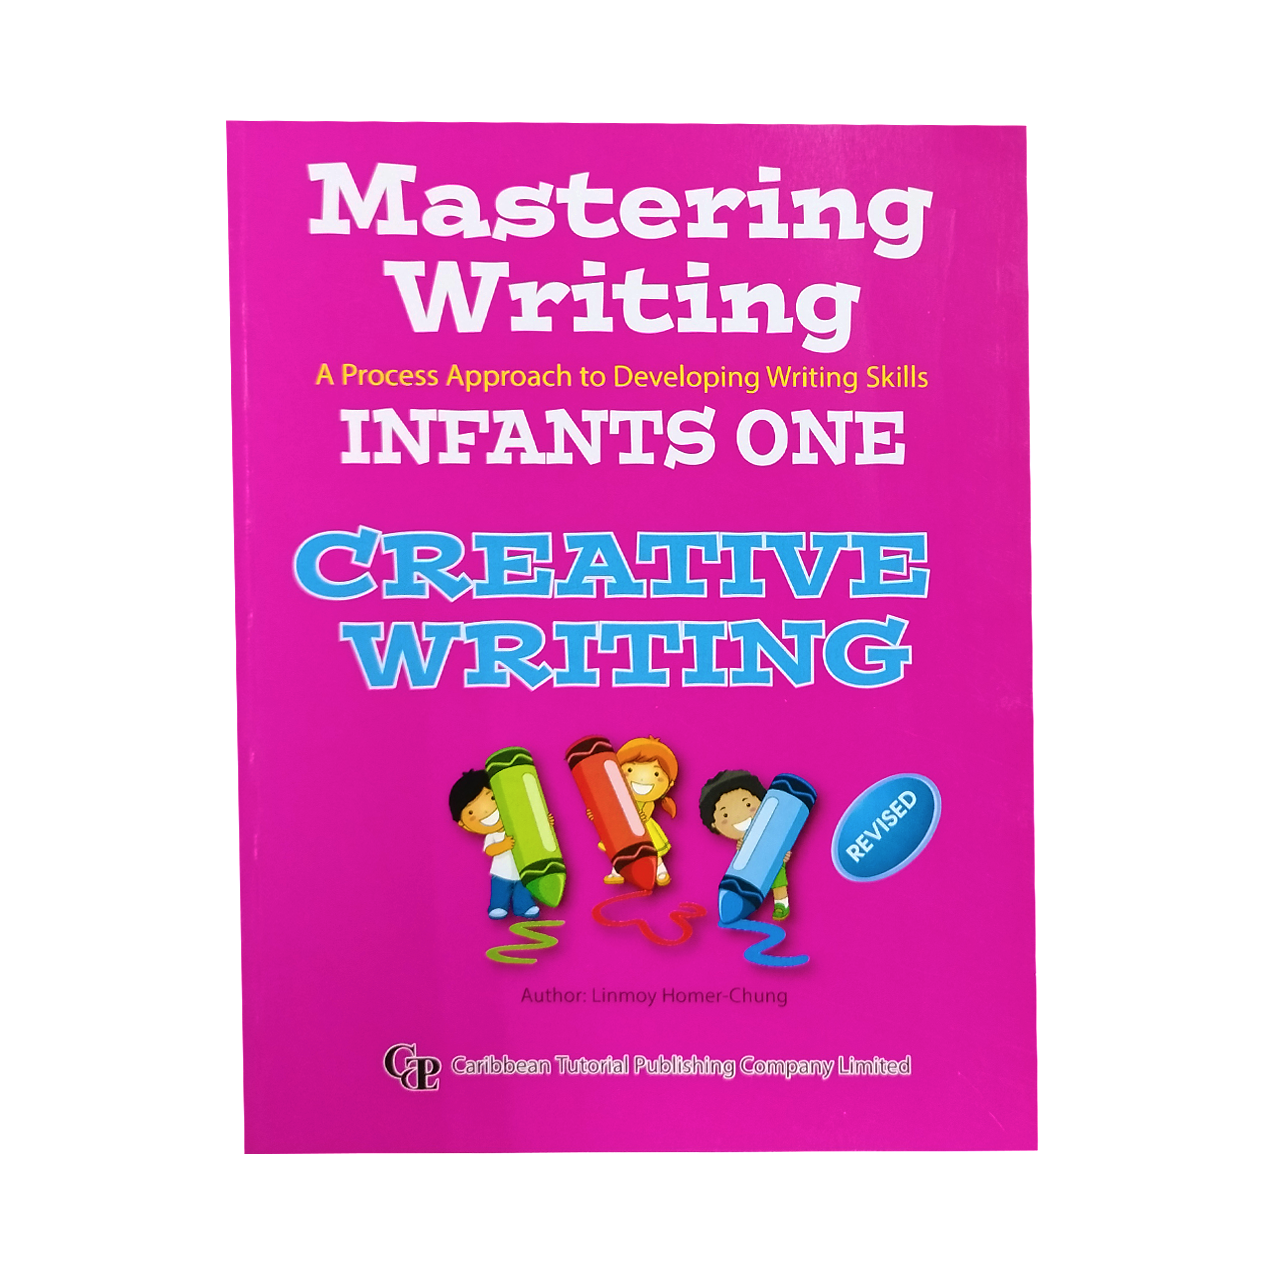 Skills　a　Skills　Process　Writing　Charran's　Creative　Approach　to　Developing　Infant　Writing　Chaguanas　Mastering　Writing